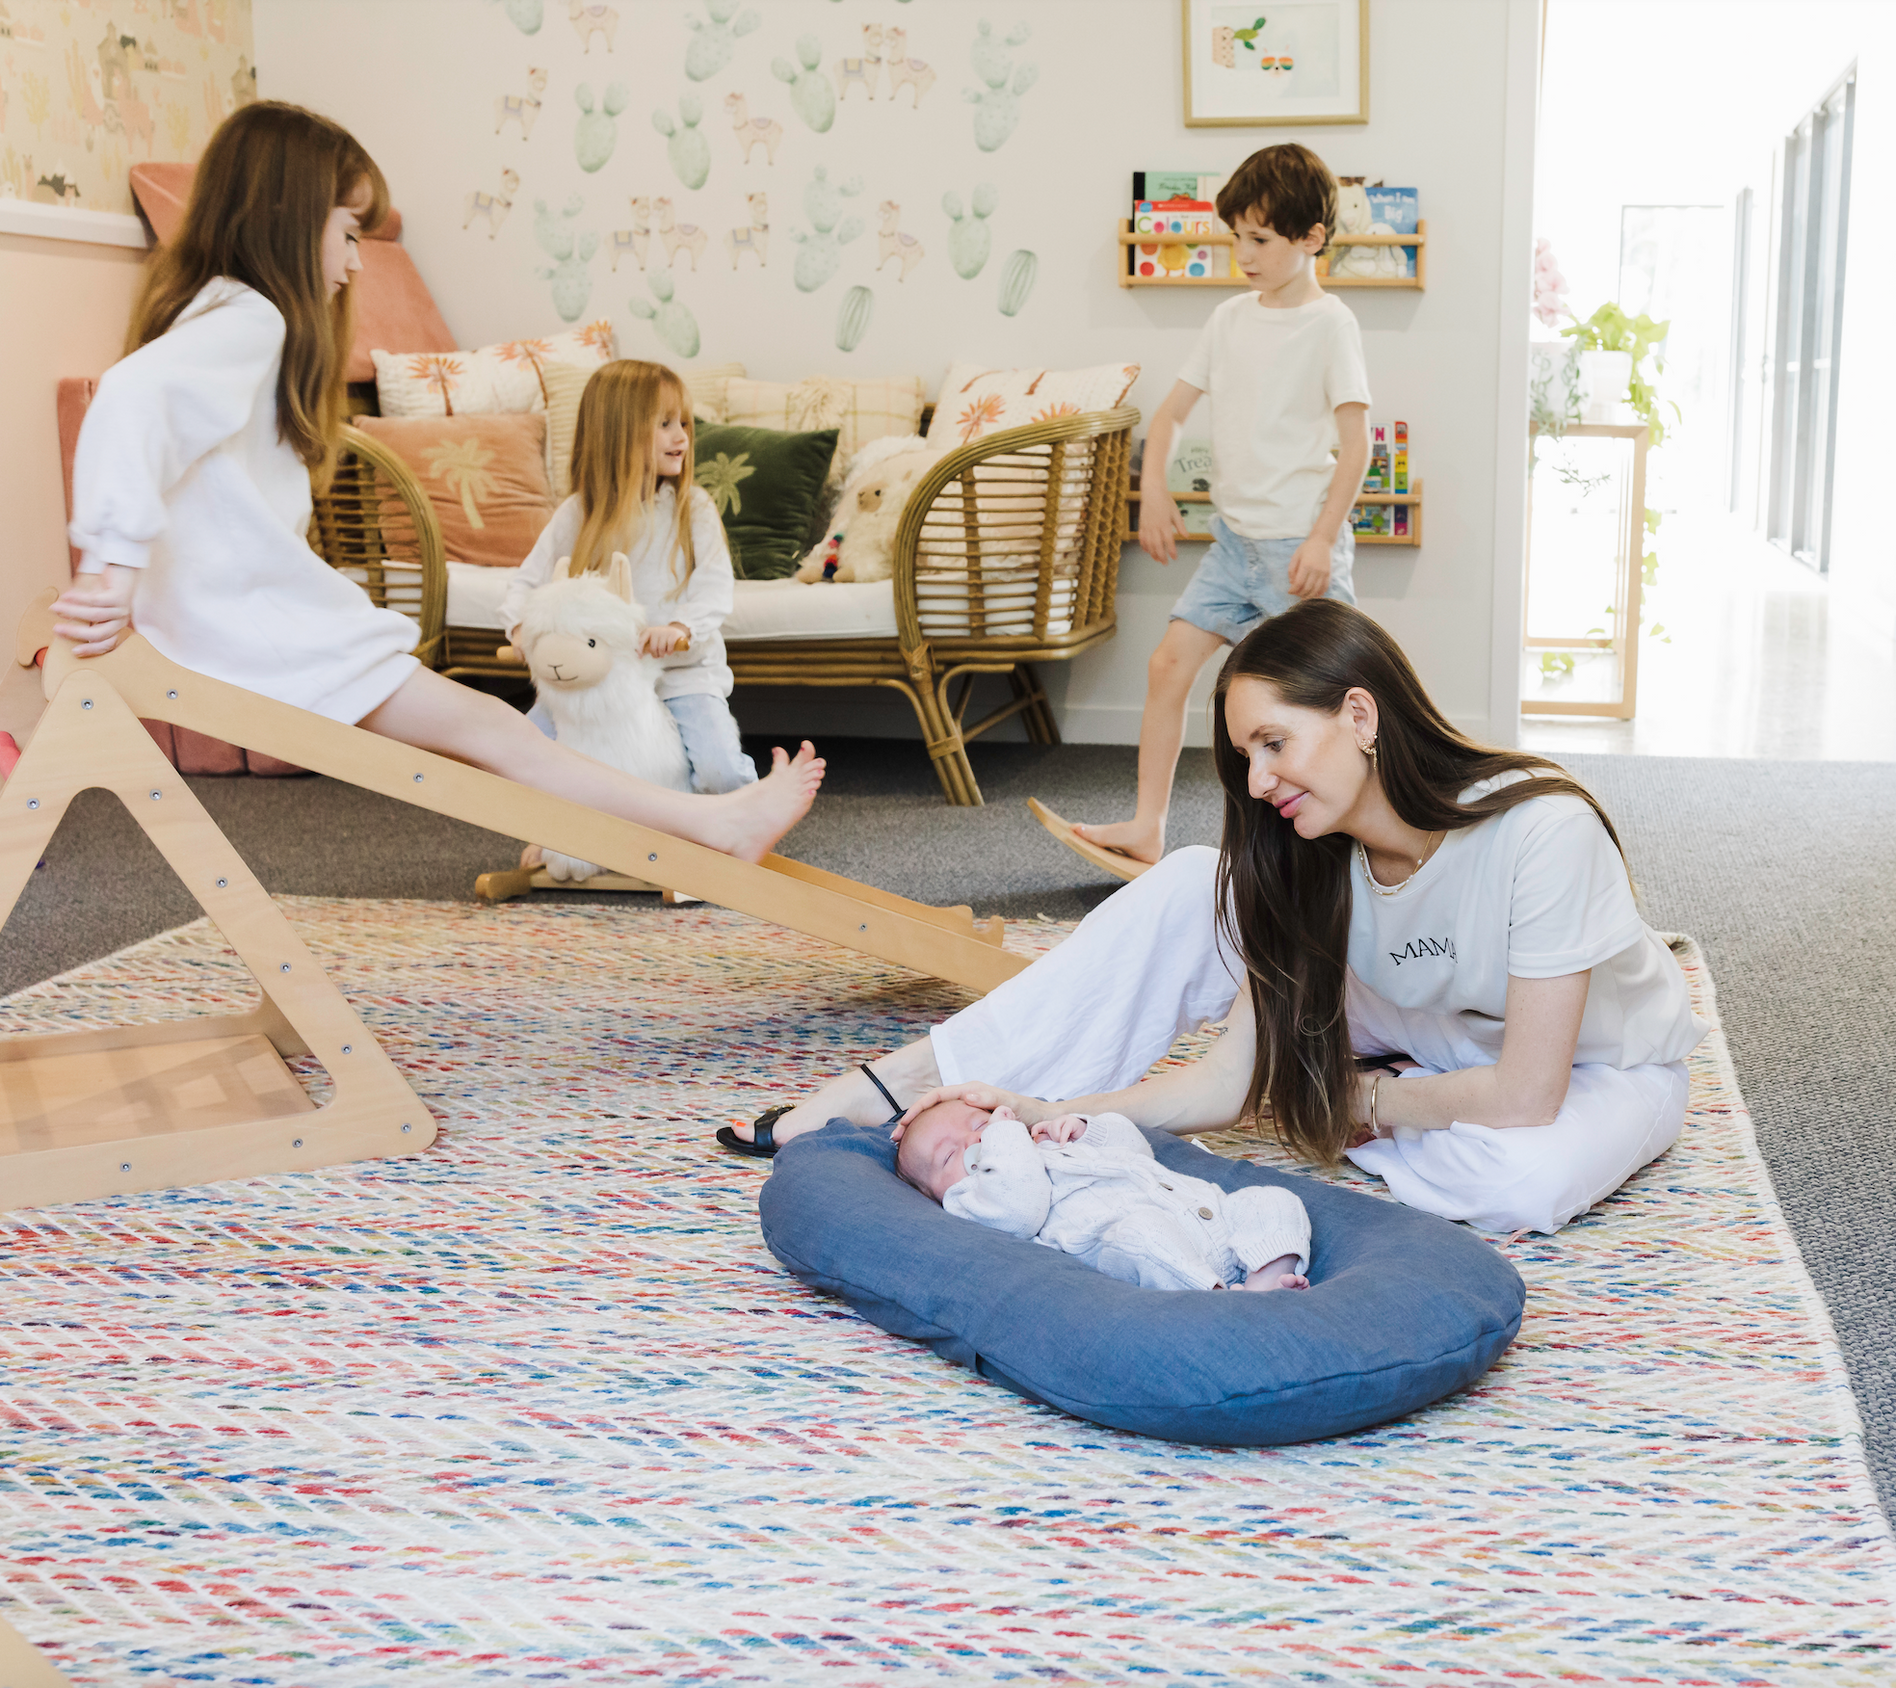 Mum With Four Of Her Children In A Kids Playroom, Looking At Her Baby Laying In A Bubba Cloud Linen Blue Lounger Whilst The Three Other Children Are Playing 